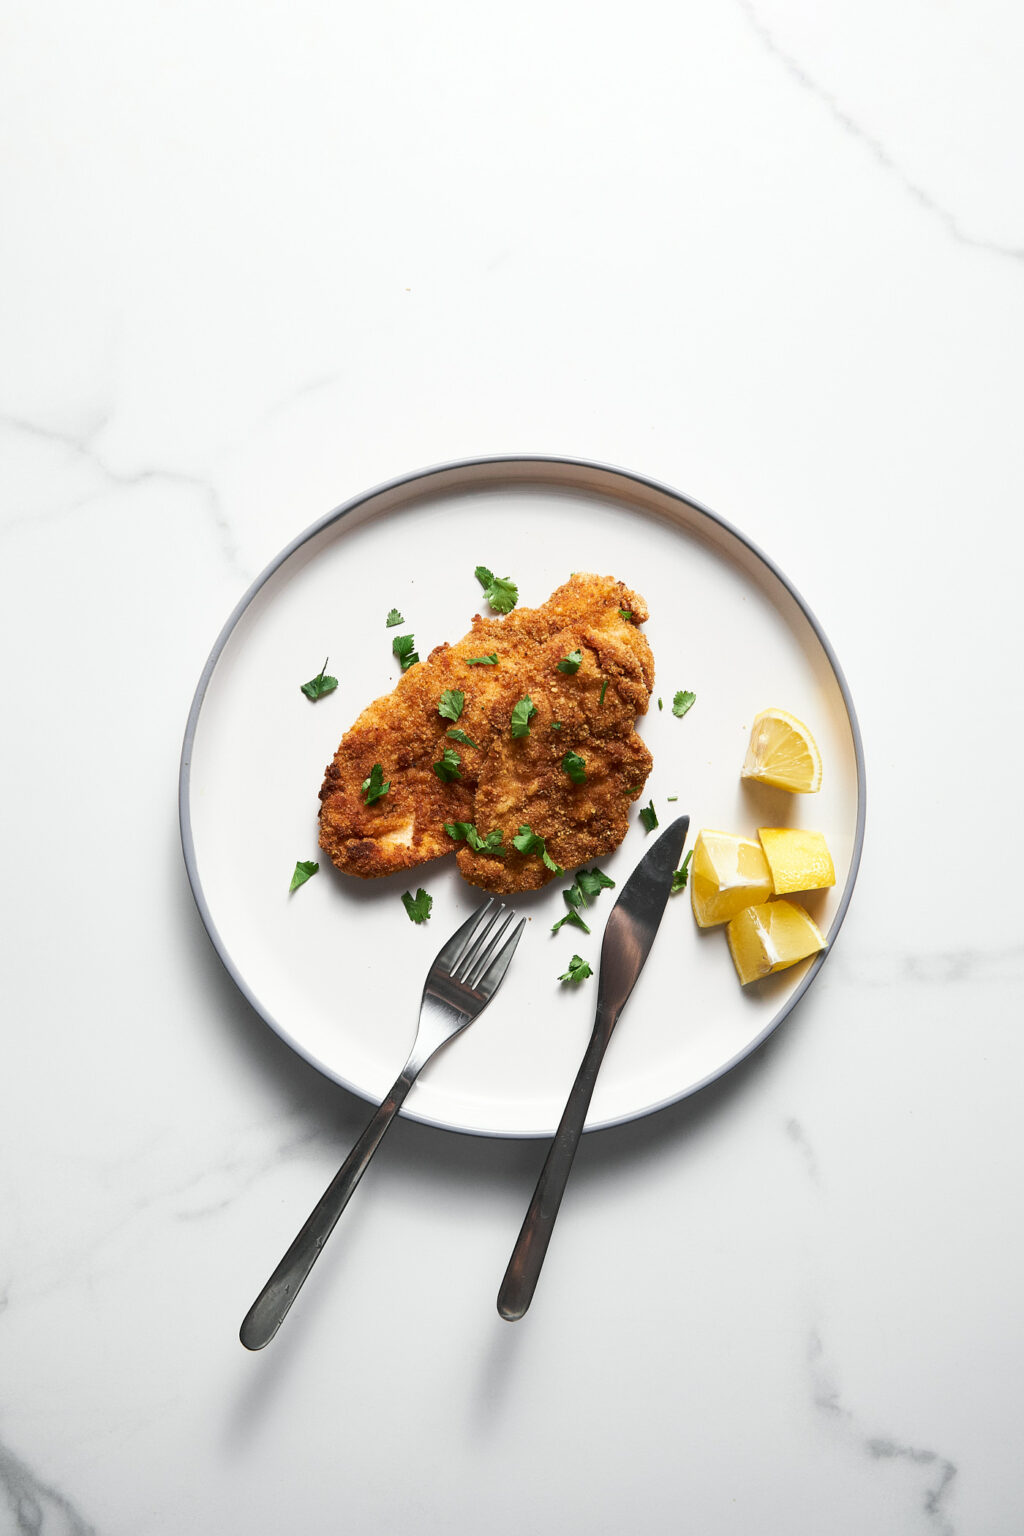 Baked chicken schnitzel with lemon on a plate